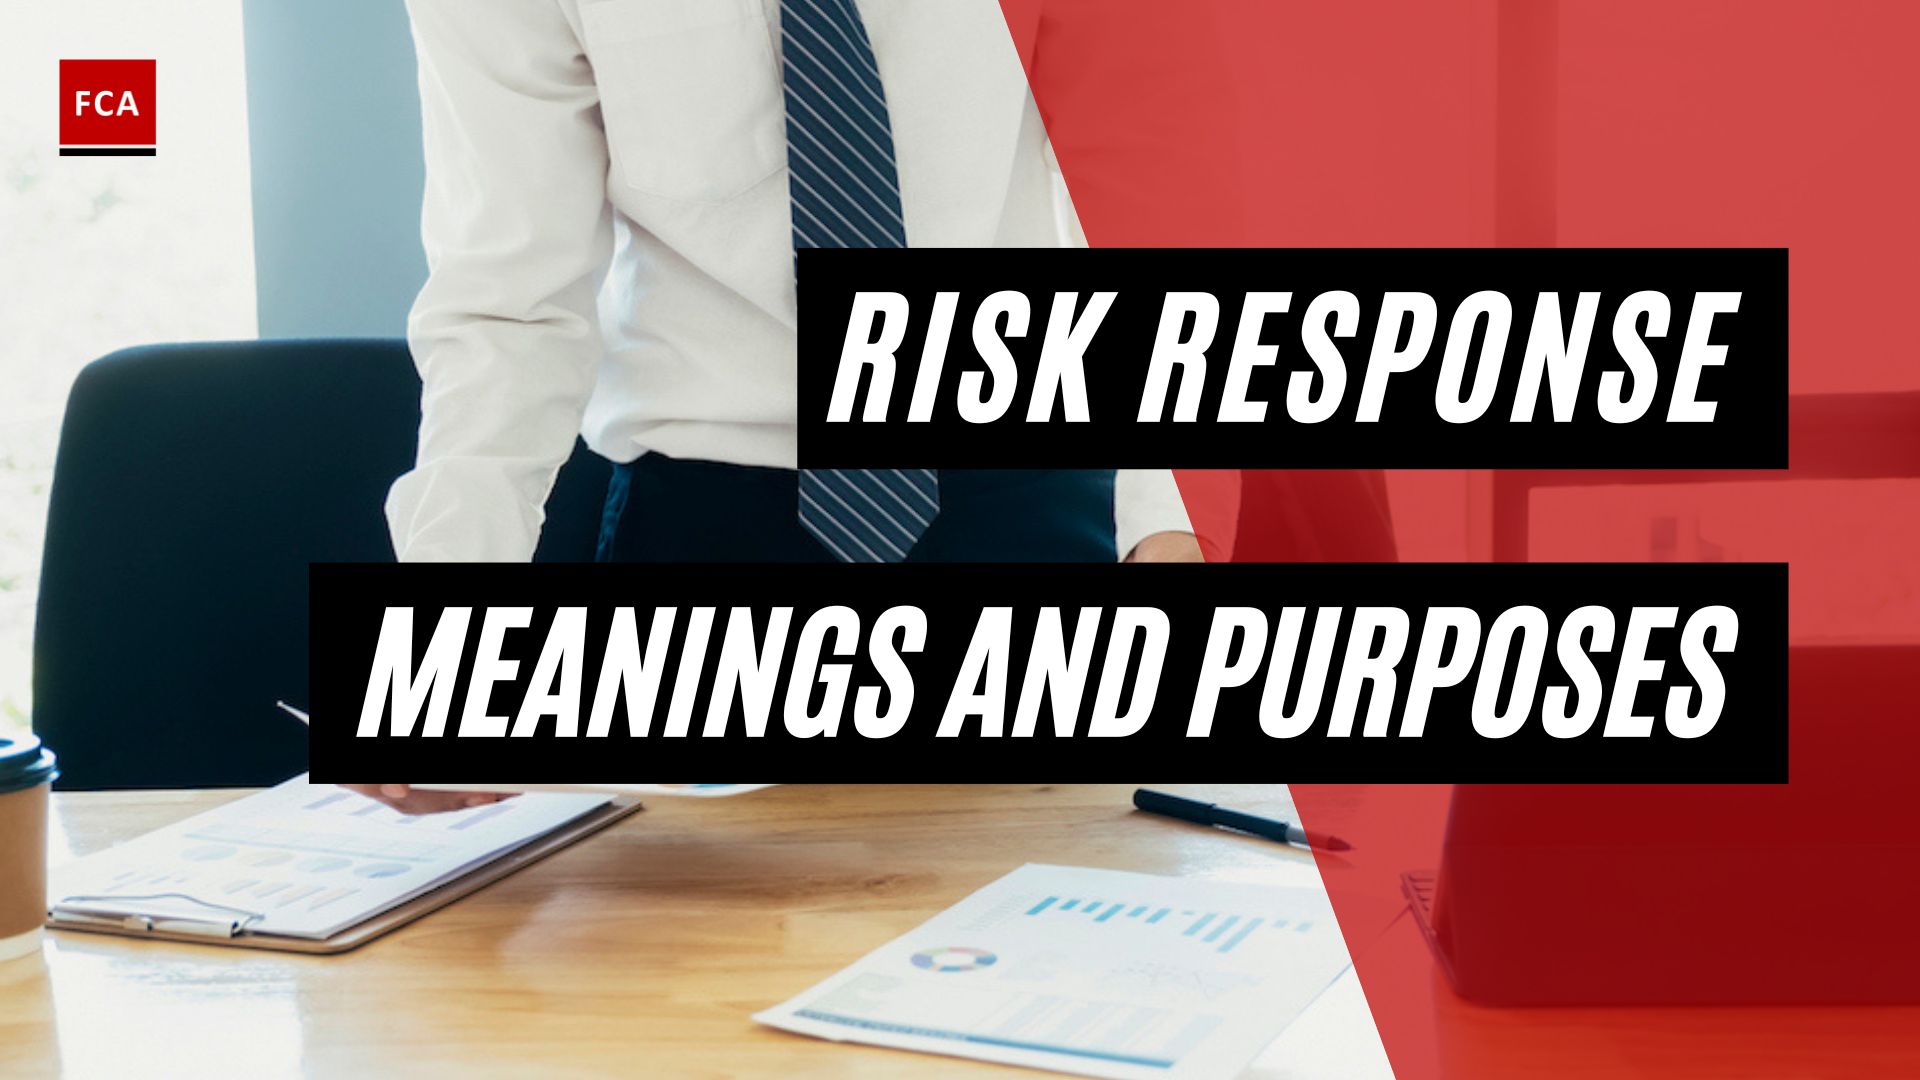 Risk Response Meanings And Purposes